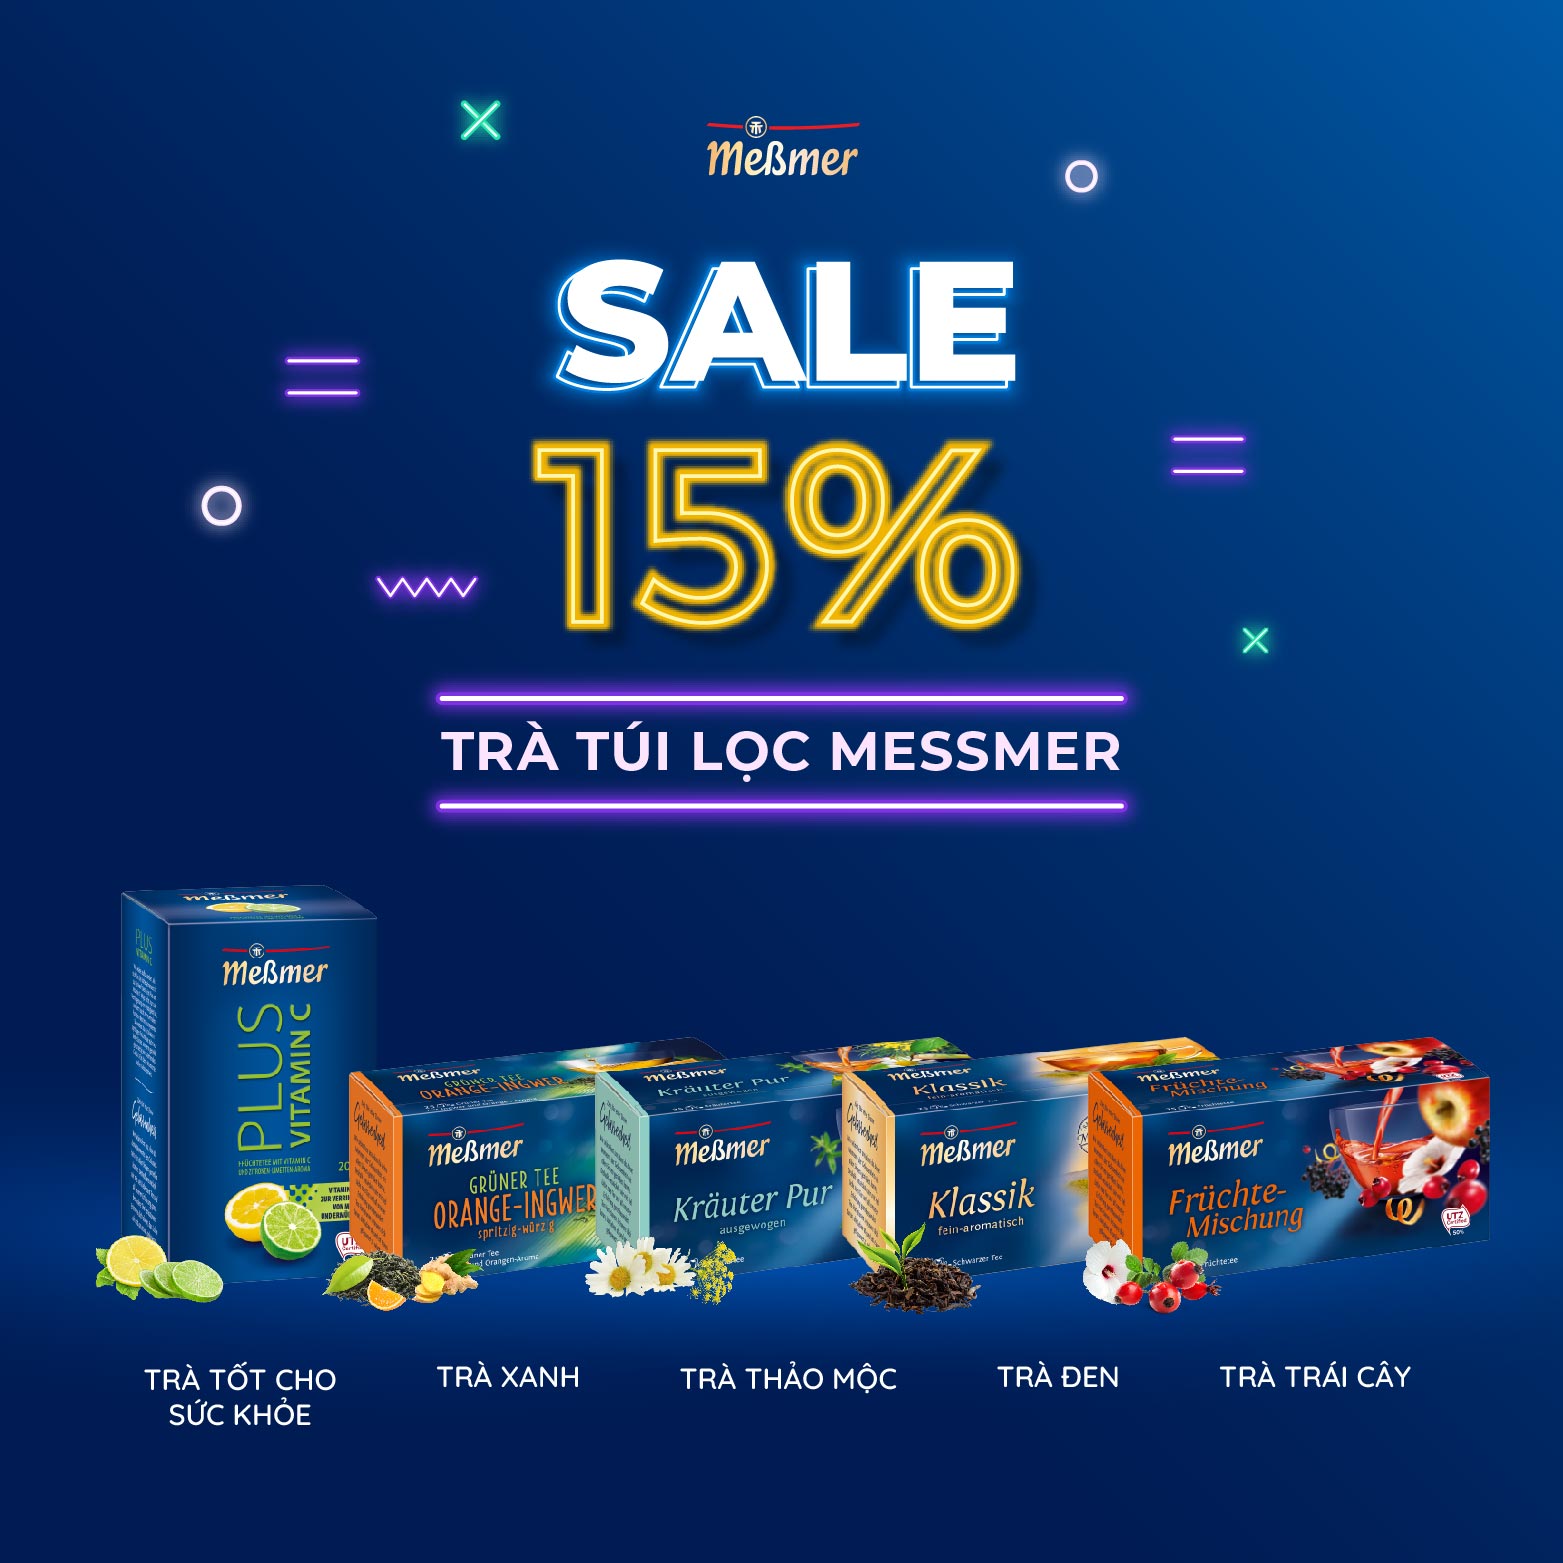 DISCOUNT 15 FOR ALL BLENDS OF MESSMER